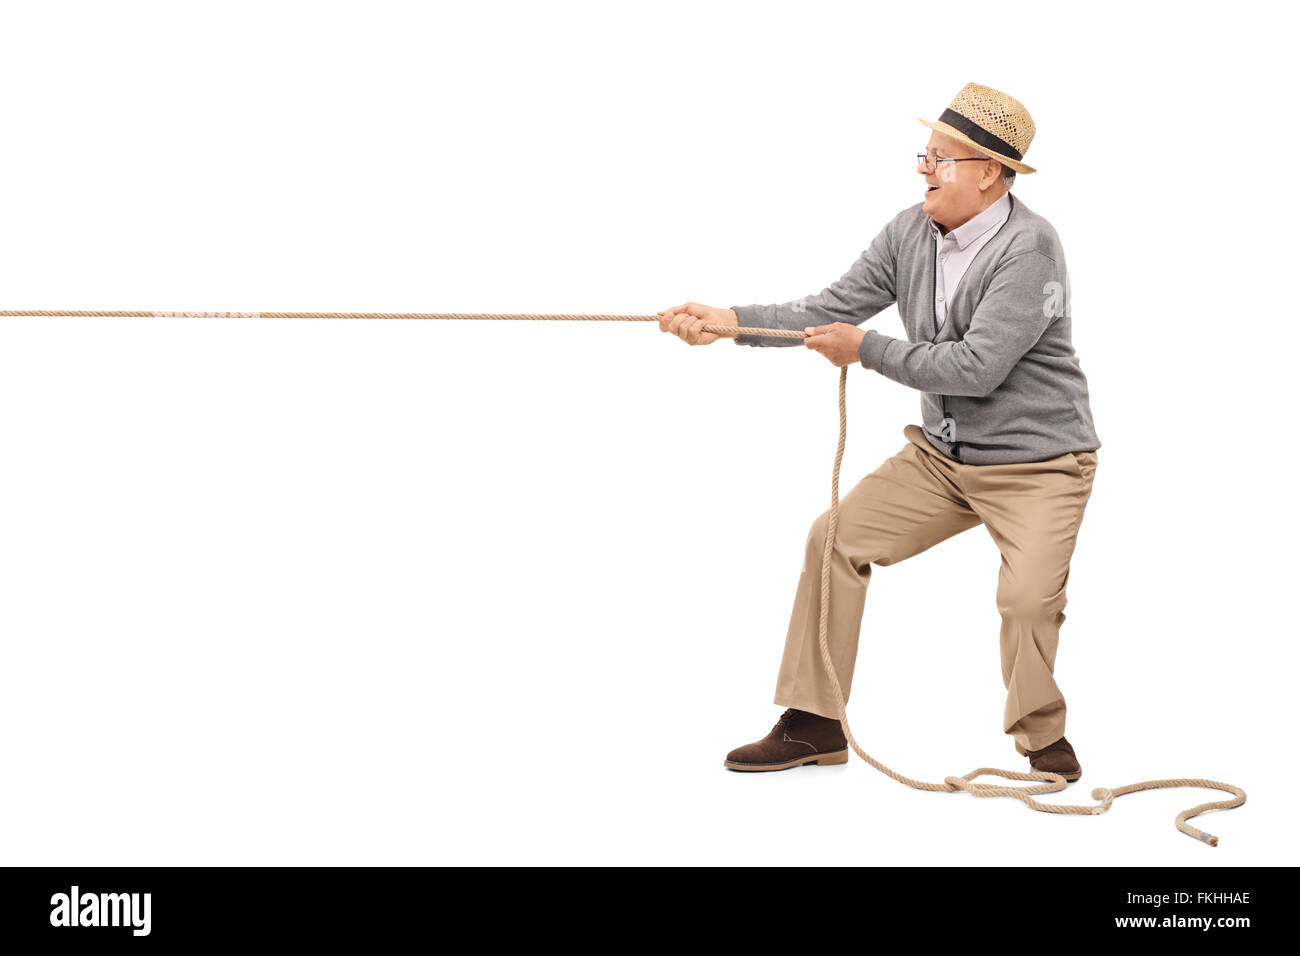 Studio shot of a cheerful senior pulling a rope isolated on white background Stock Photo